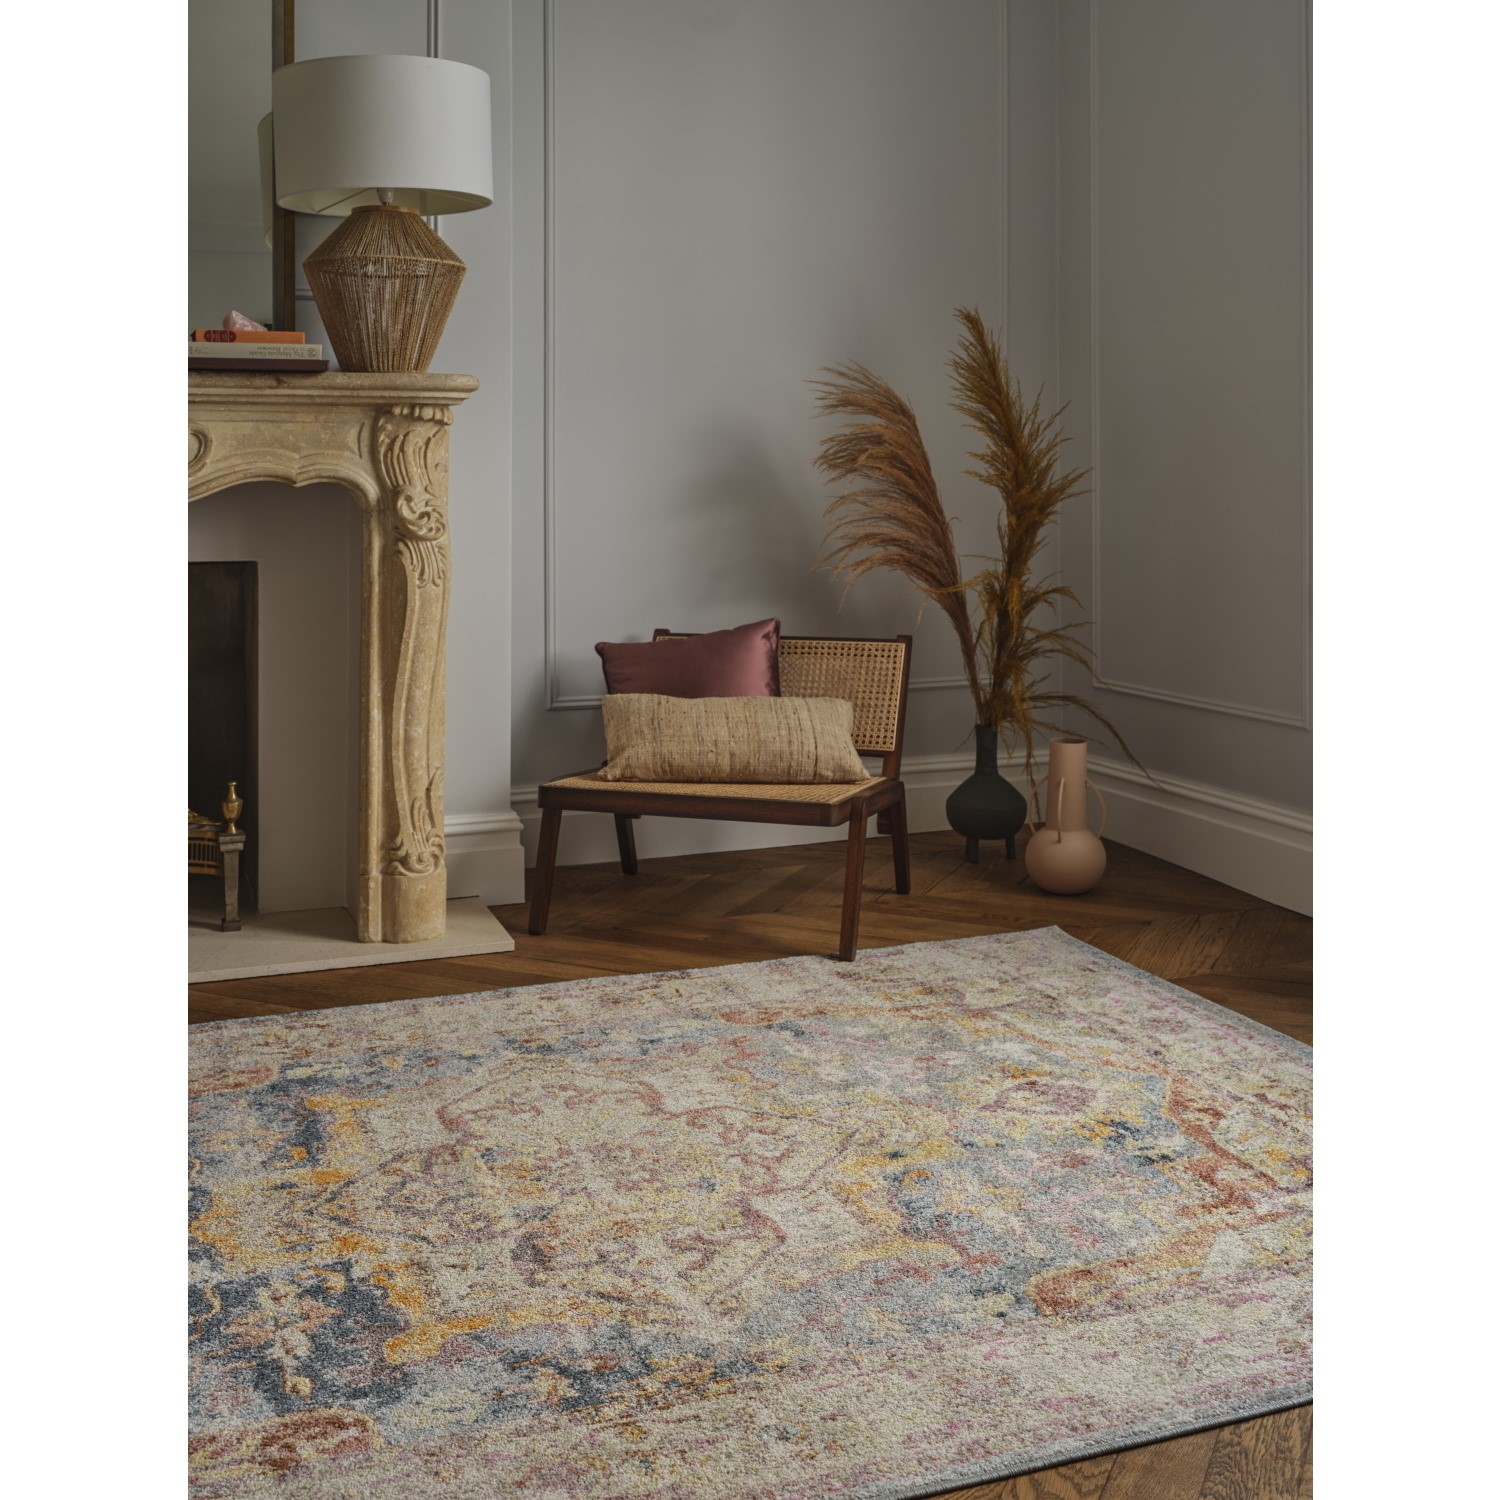 Read more about Persian distressed rug 200x290cm flores